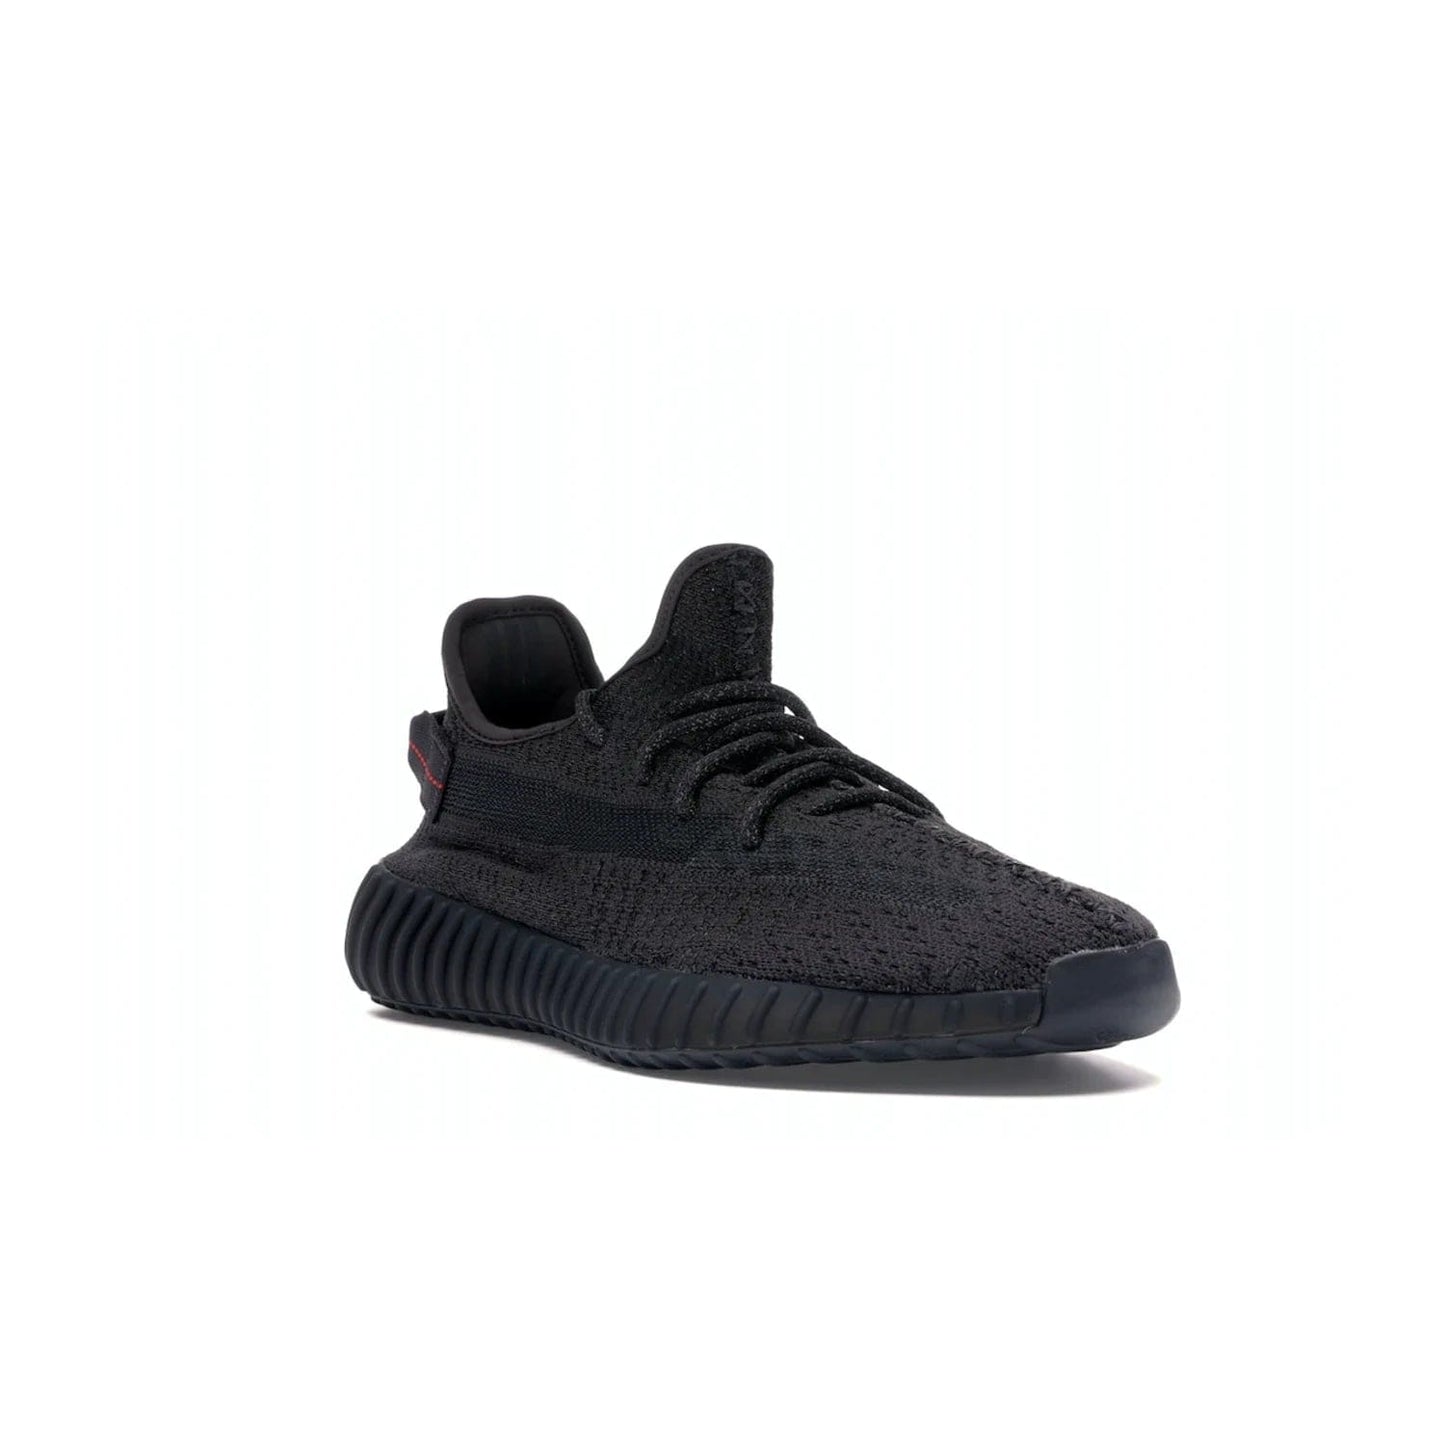 adidas Yeezy Boost 350 V2 Static Black (Reflective) - Image 6 - Only at www.BallersClubKickz.com - Make a statement with the adidas Yeezy Boost 350 V2 Static Black Reflective. All-black upper, reflective accents, midsole, and sole combine for a stylish look. High quality materials. June 2019 release. Add to your collection today.